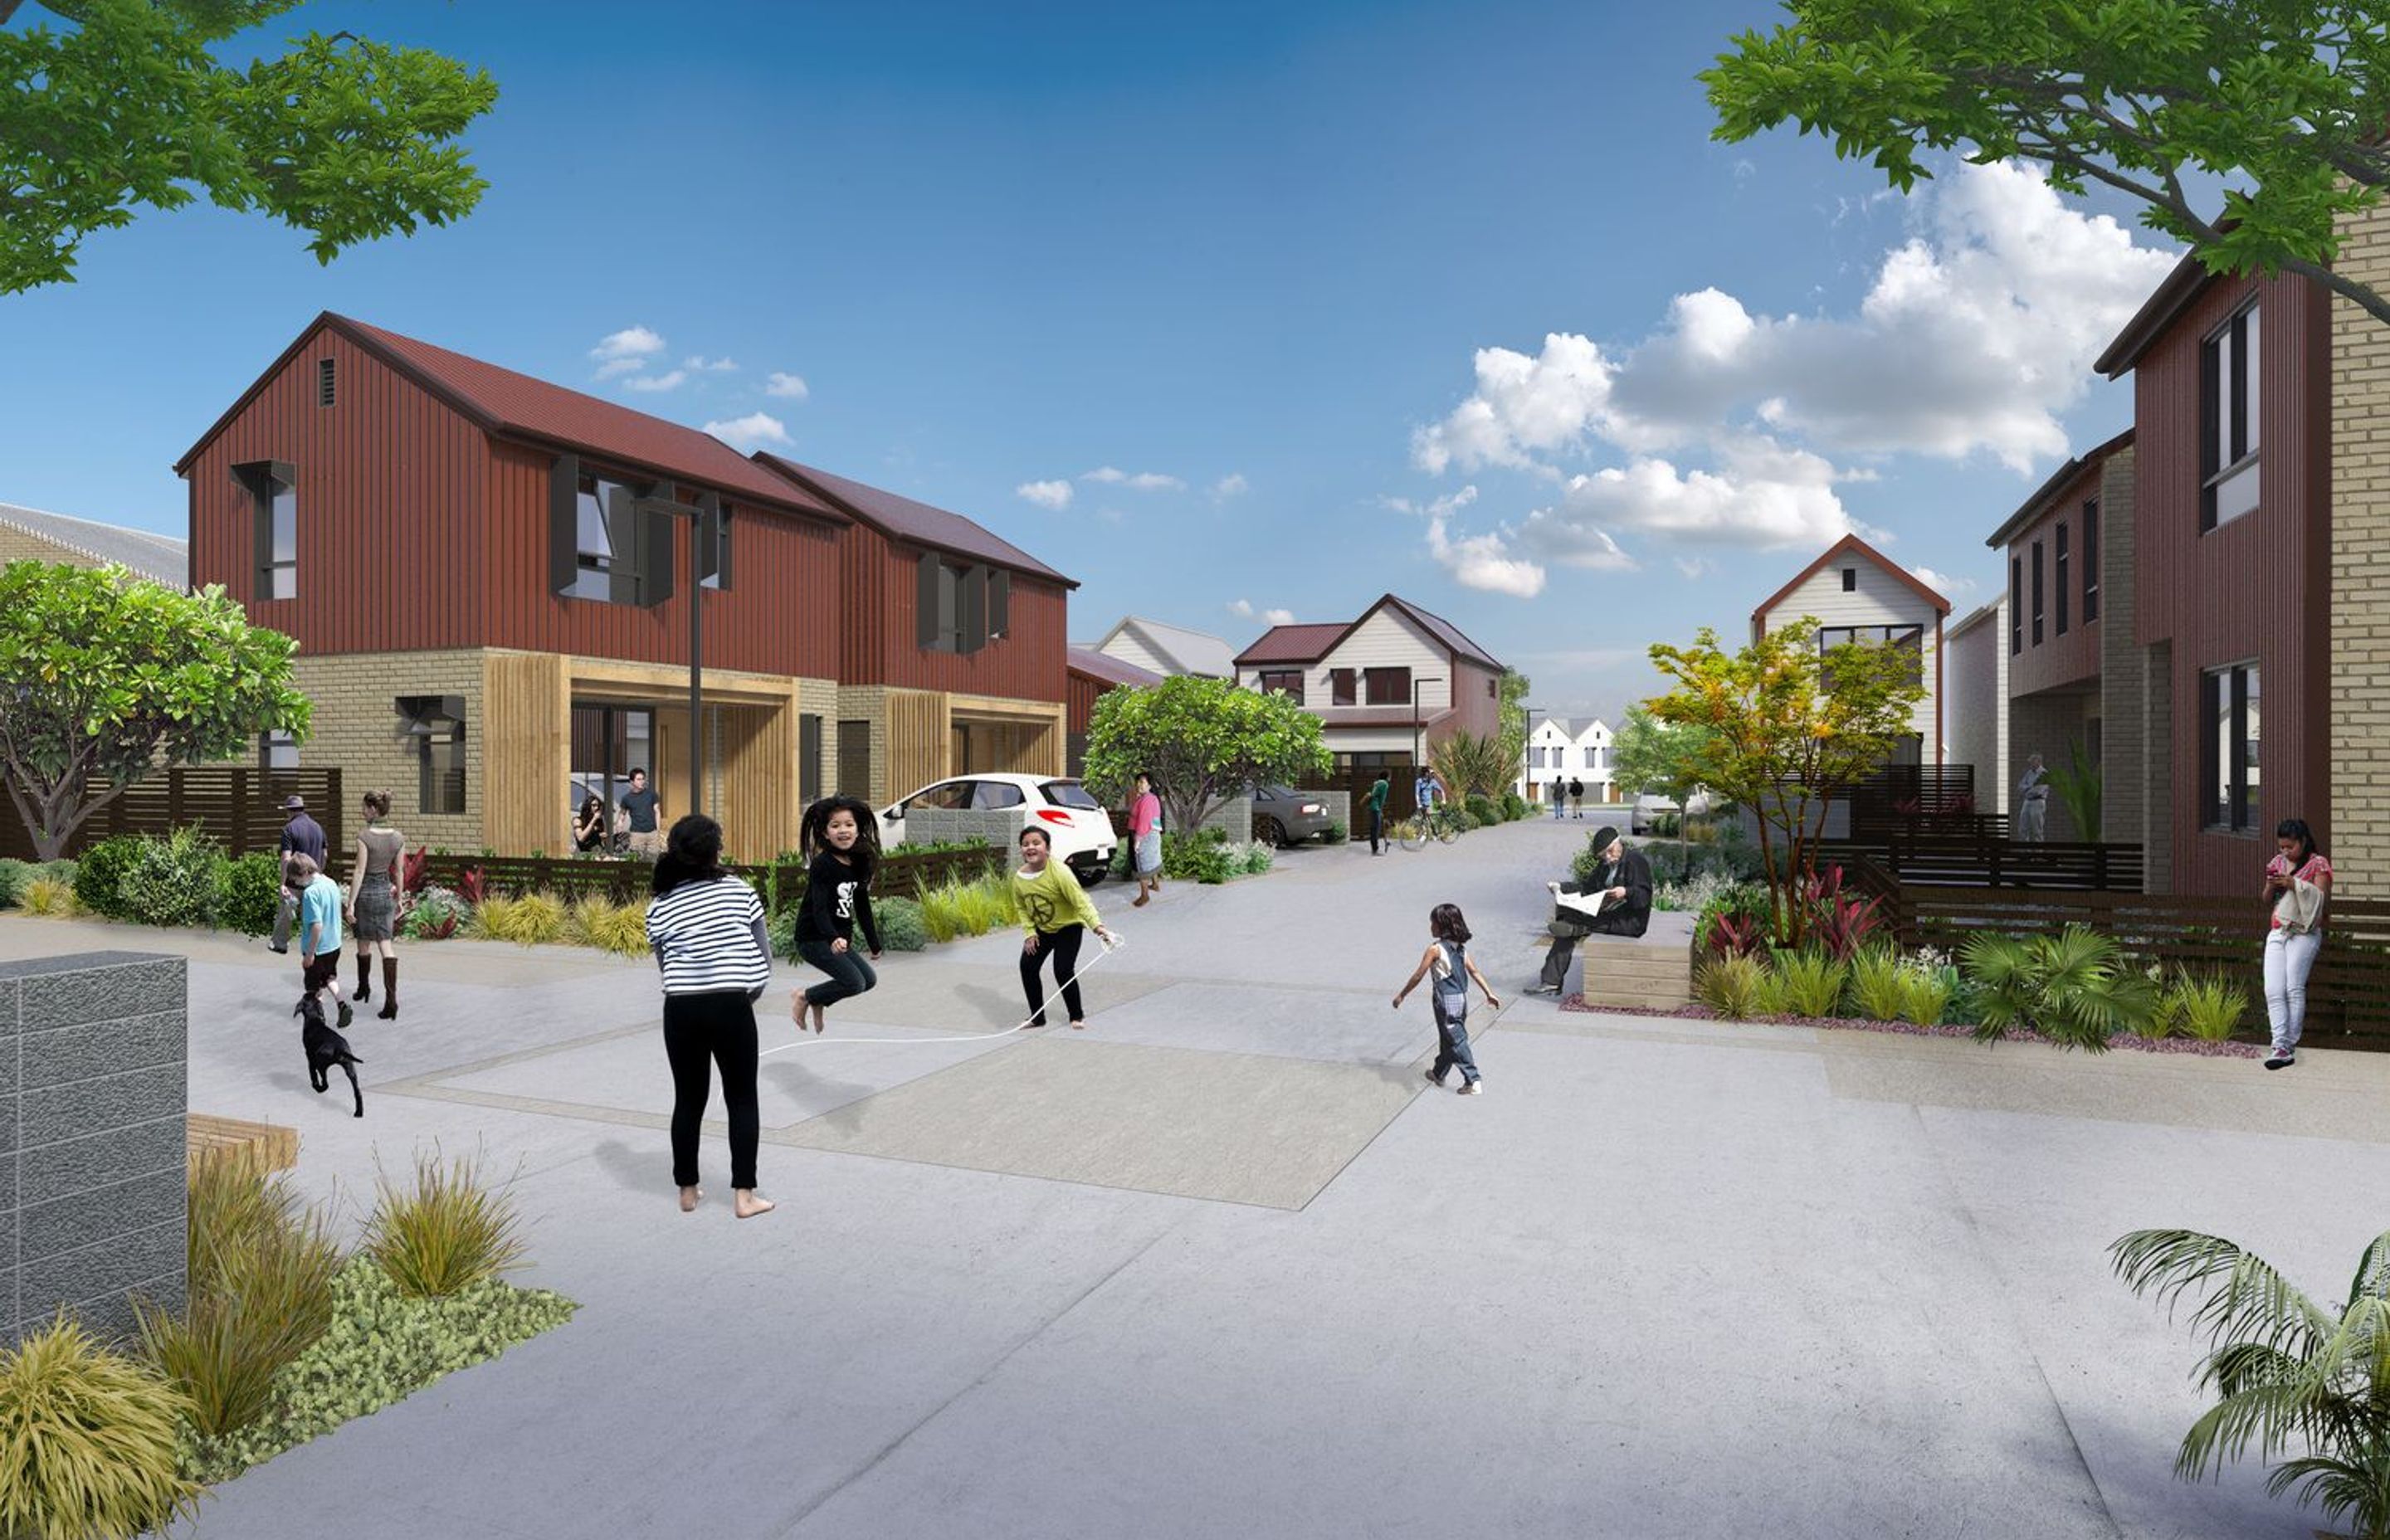 The Fenchurch neighbourhood is a blind mixed-tenure model, which means there are social, affordable and market homes.